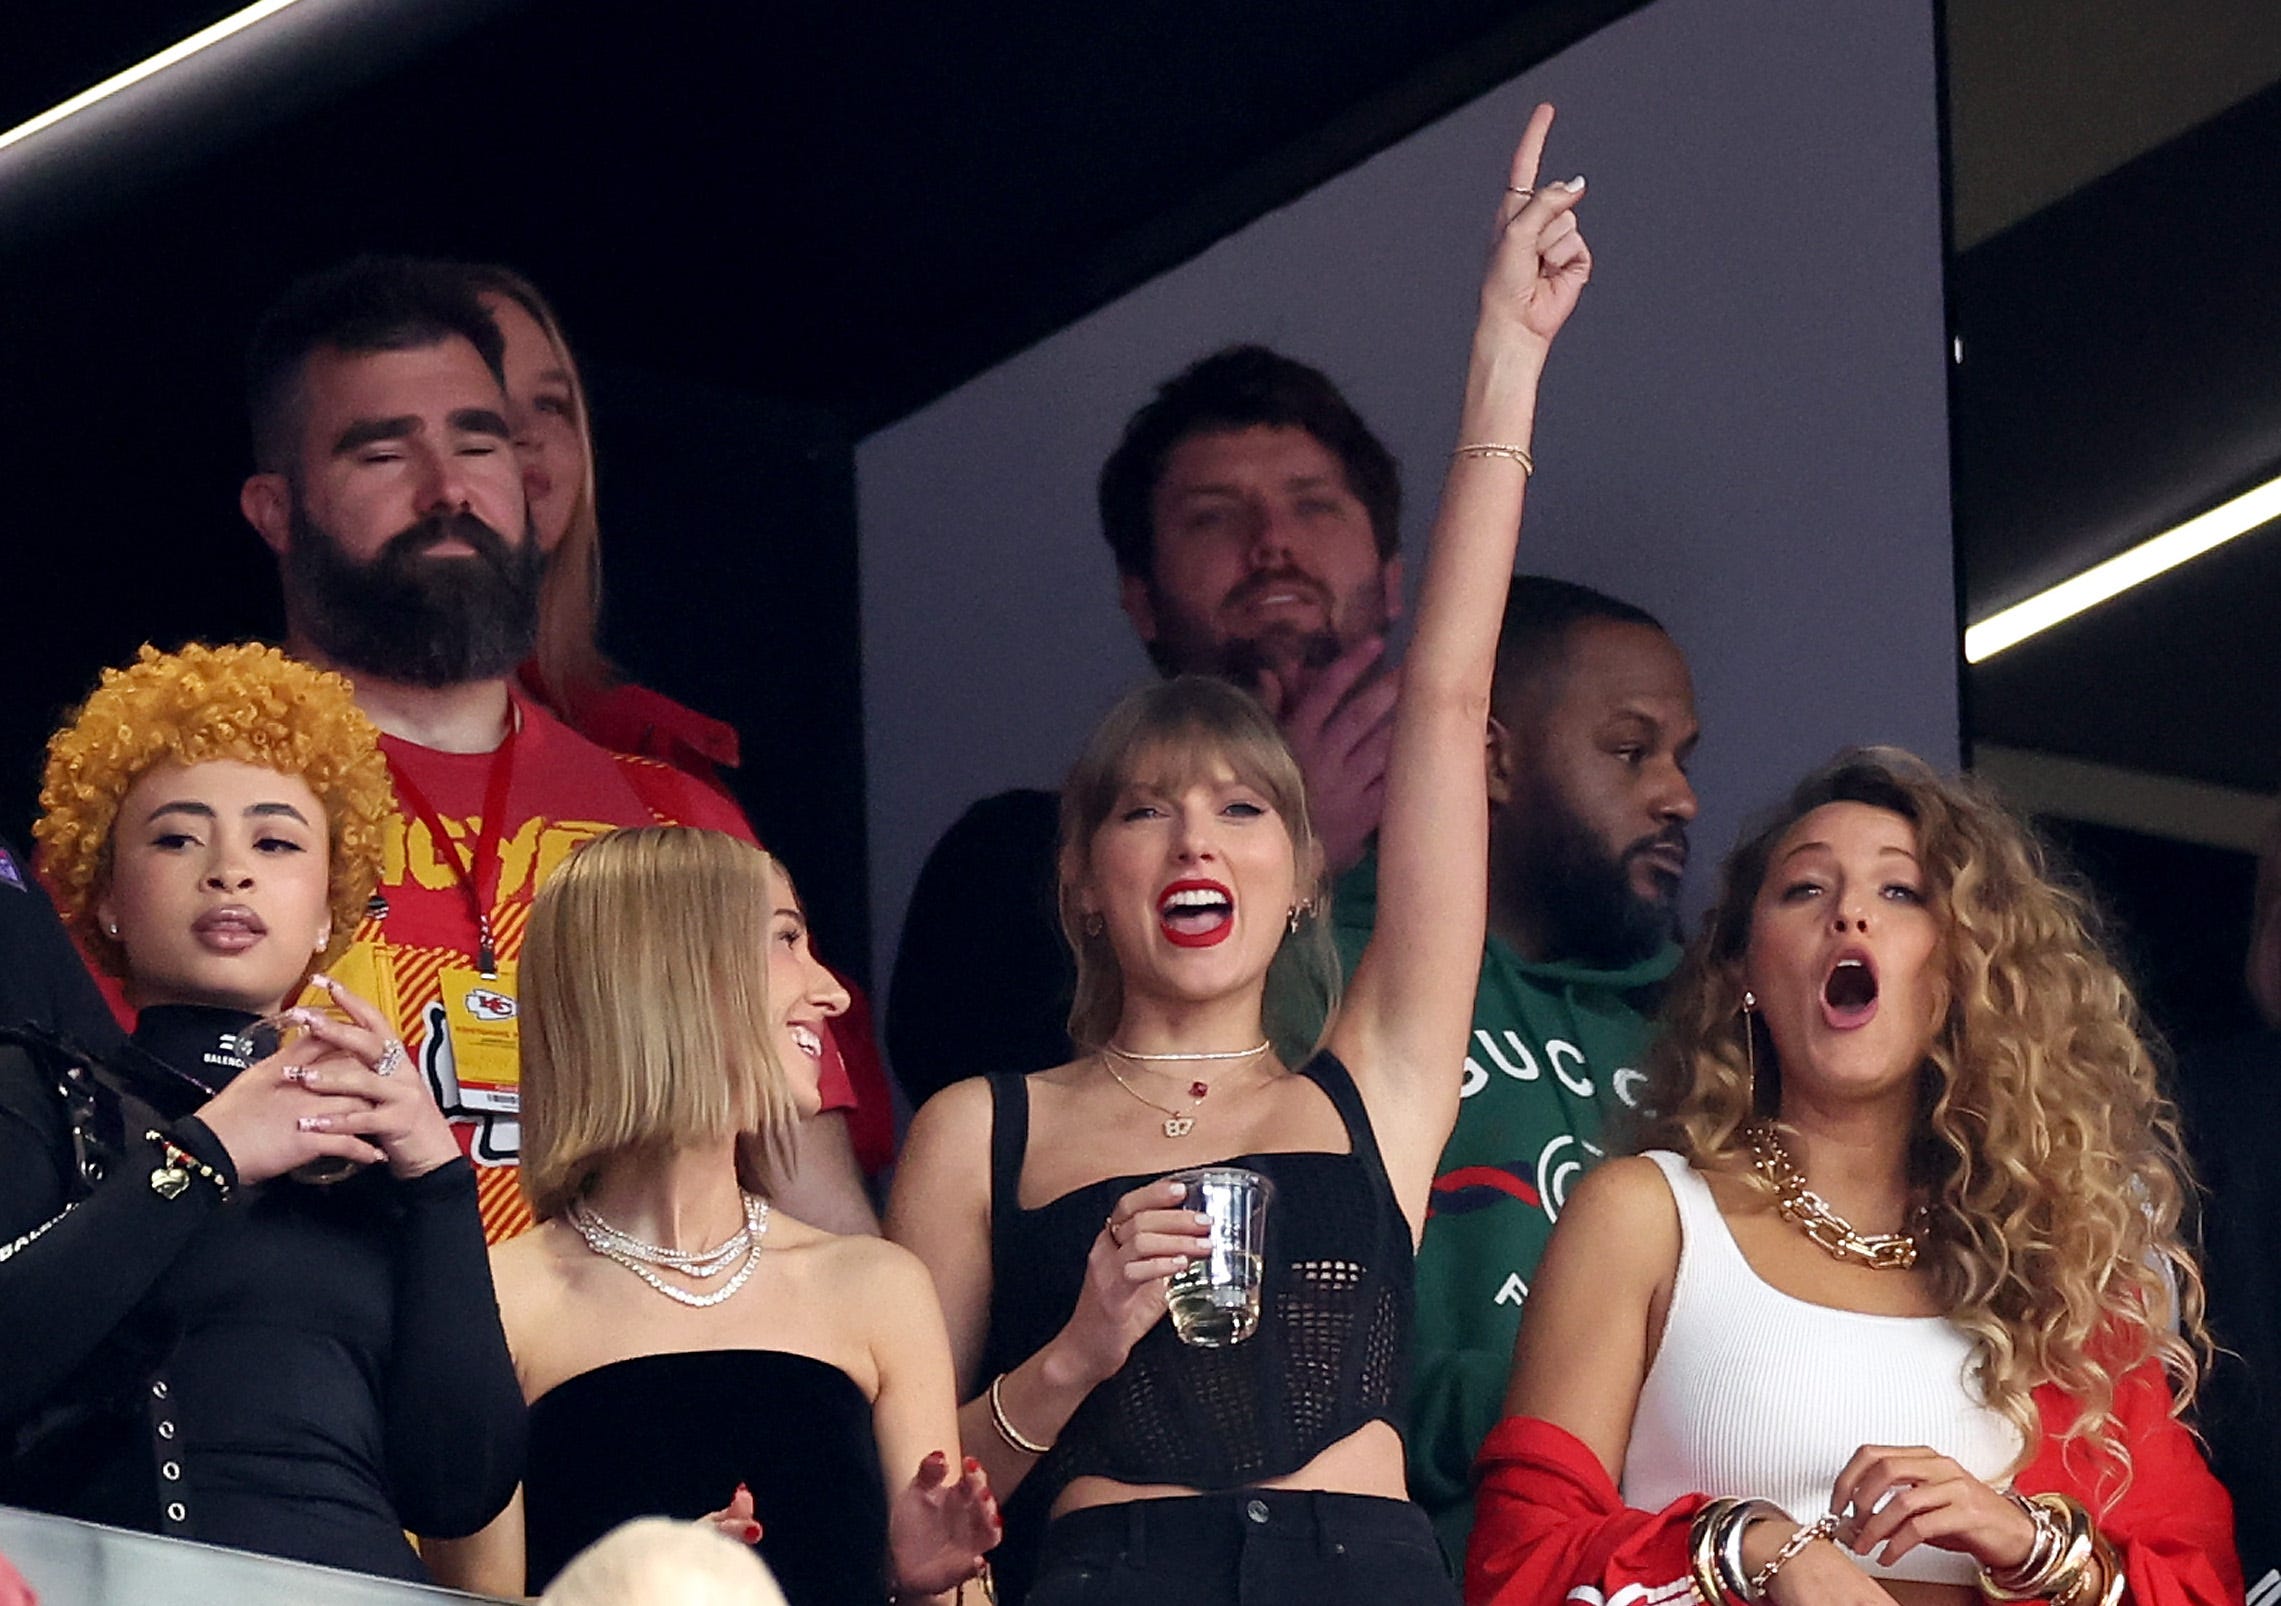 taylor swift's 53 seconds of airtime during the super bowl is worth about $12.4 million